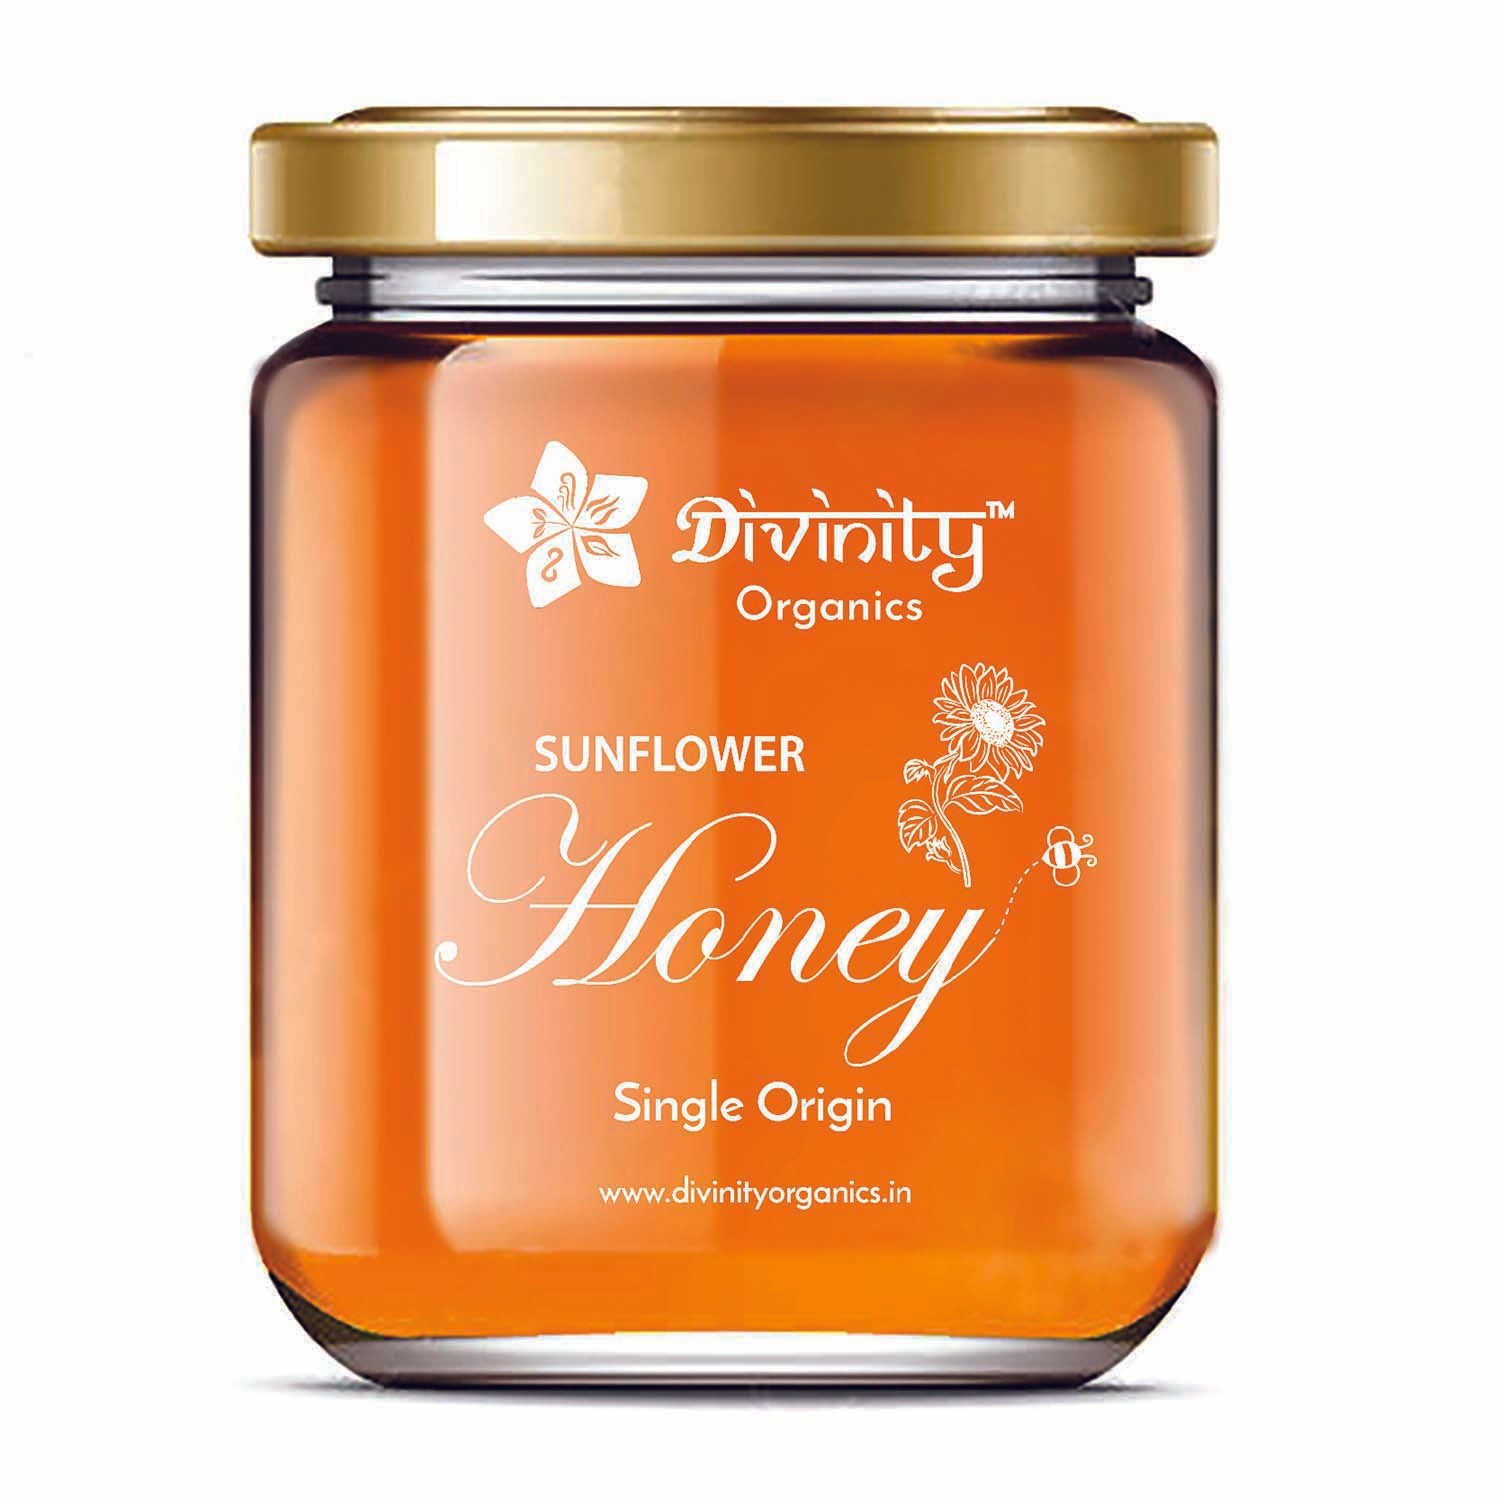 Divinity Organics - Sunflower Honey -Made from the nectar of sunflowers, sunflower honey is high in natural glucose. Much like the colour of this flower is a delight to the eyes, the honey is also delightful, an instant hit of energy. Harvested from the gorgeous sunflower fields in Nagpur, Maharashtra, this mild flavoured honey is the perfect sweetner